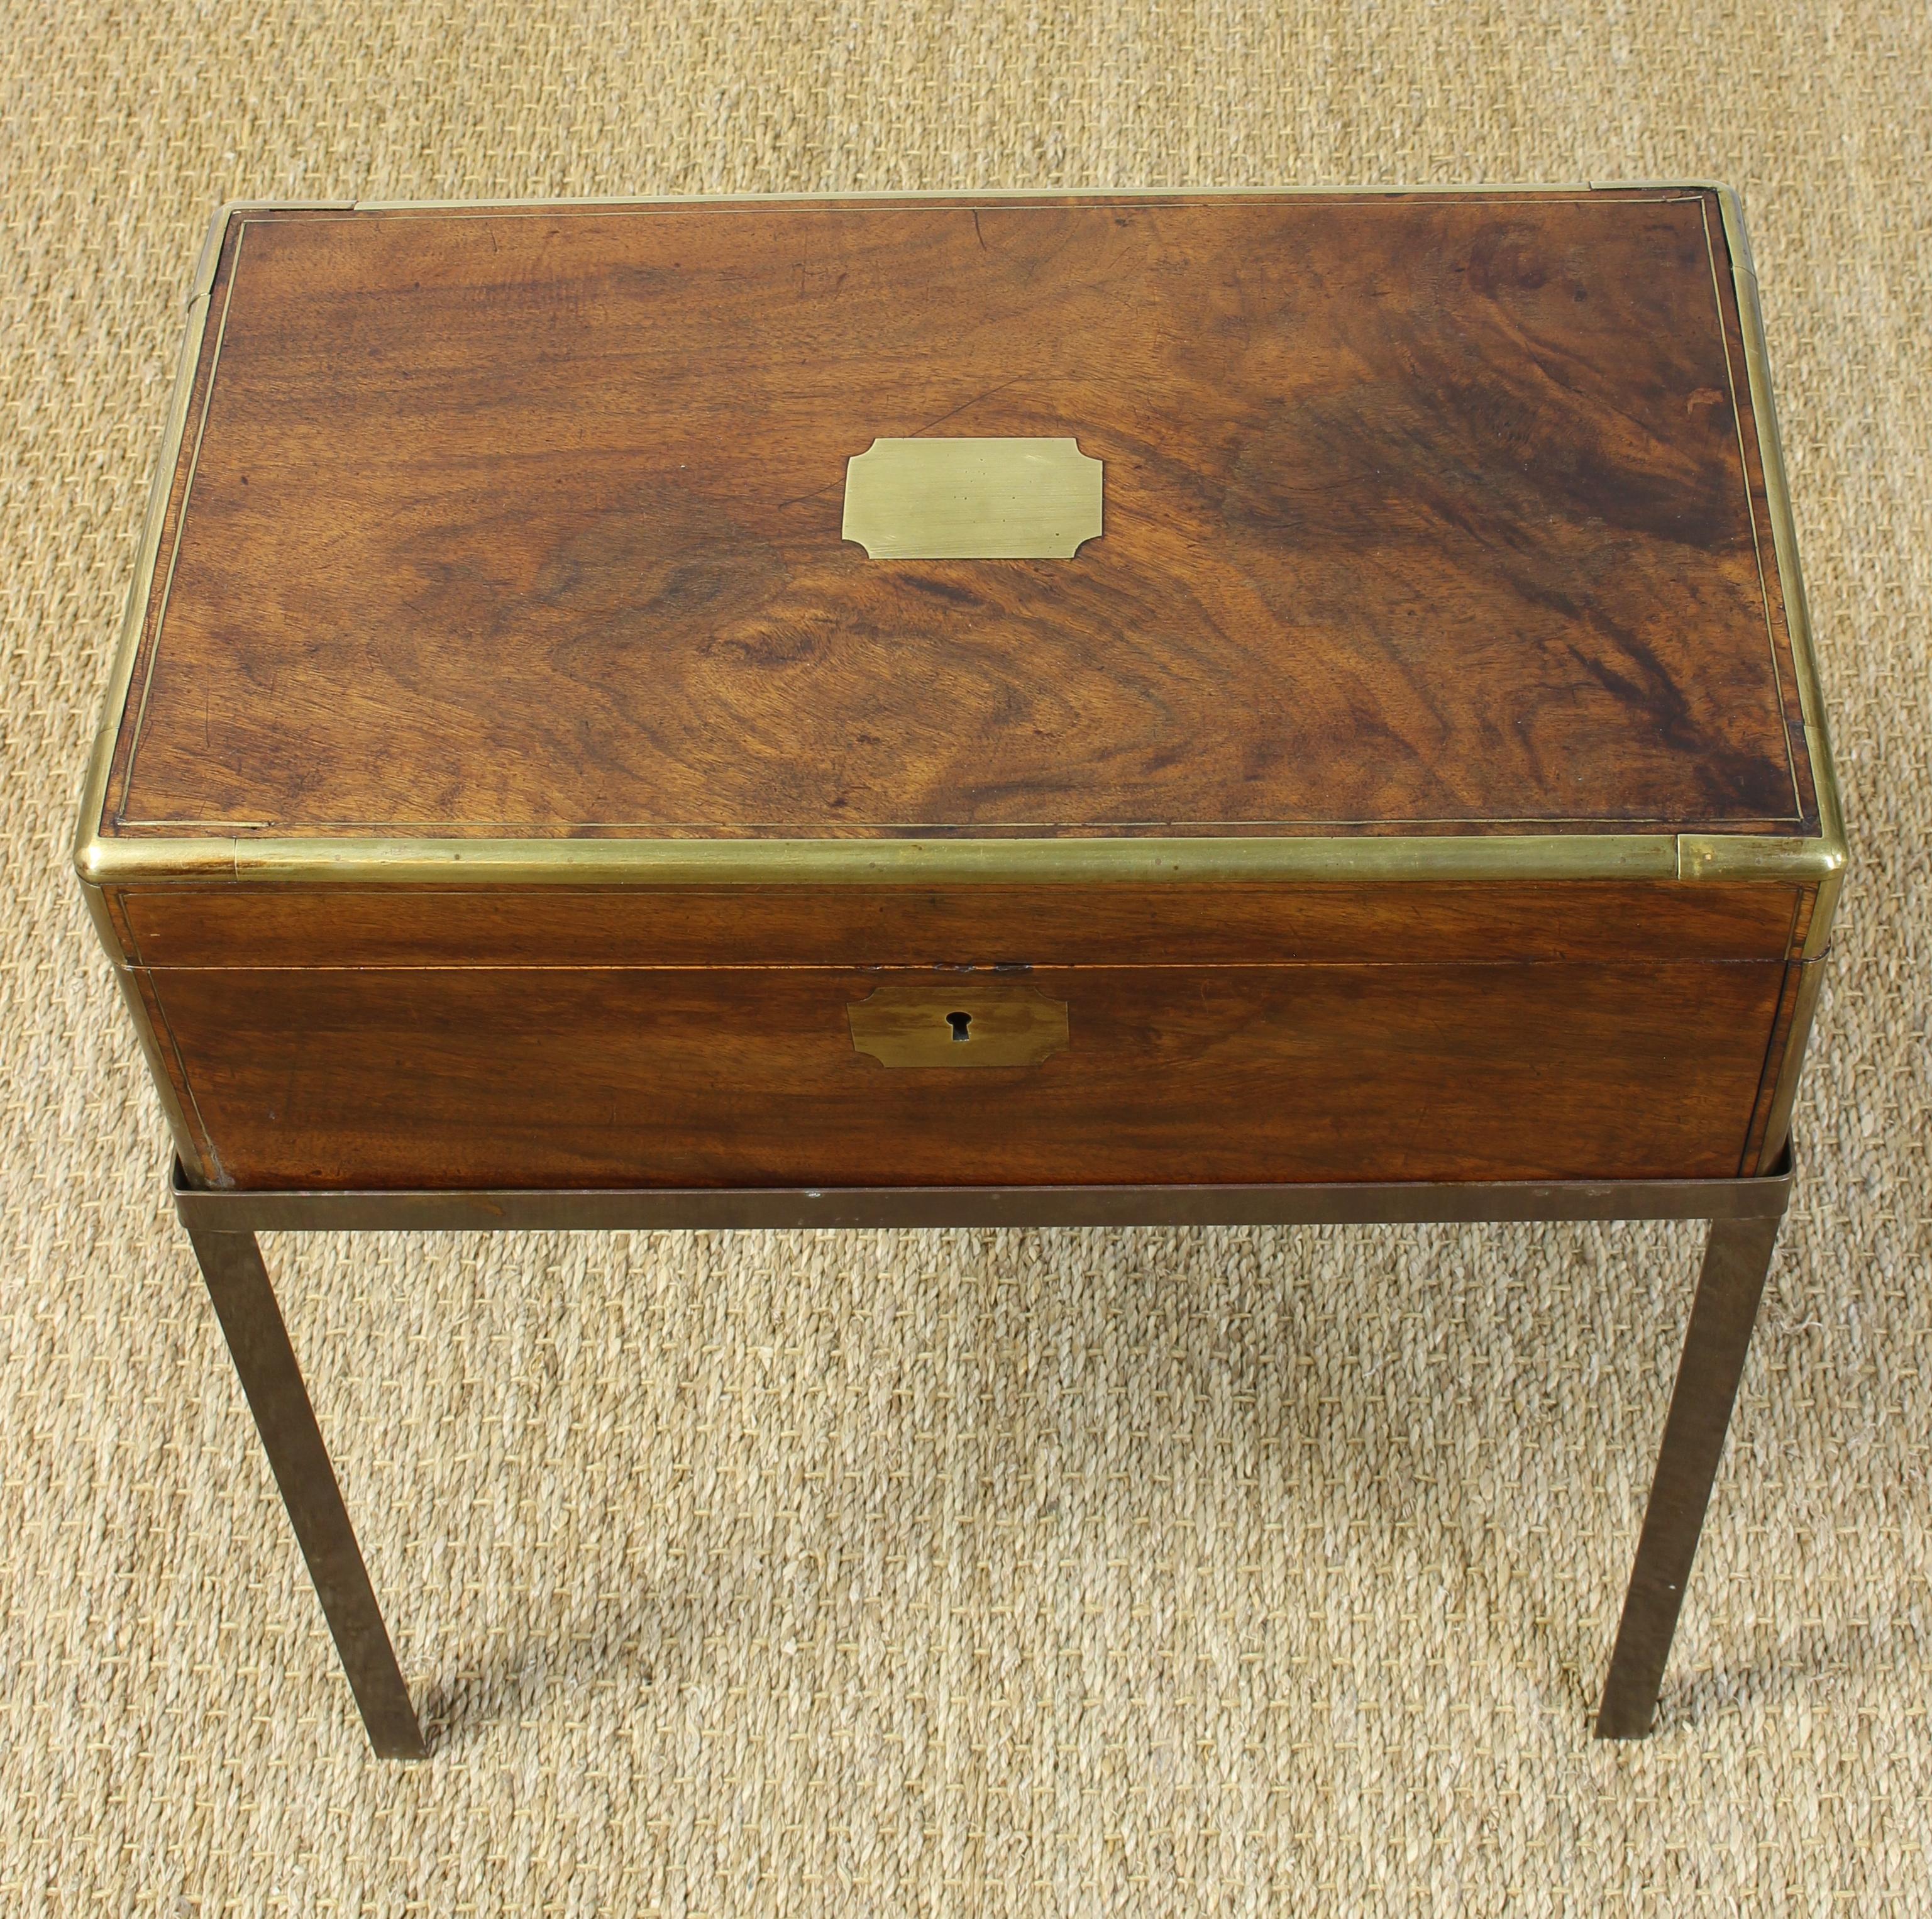 An elegant mid-19th century English brass bound mahogany writing box or lap desk on later custom-made brass stand.